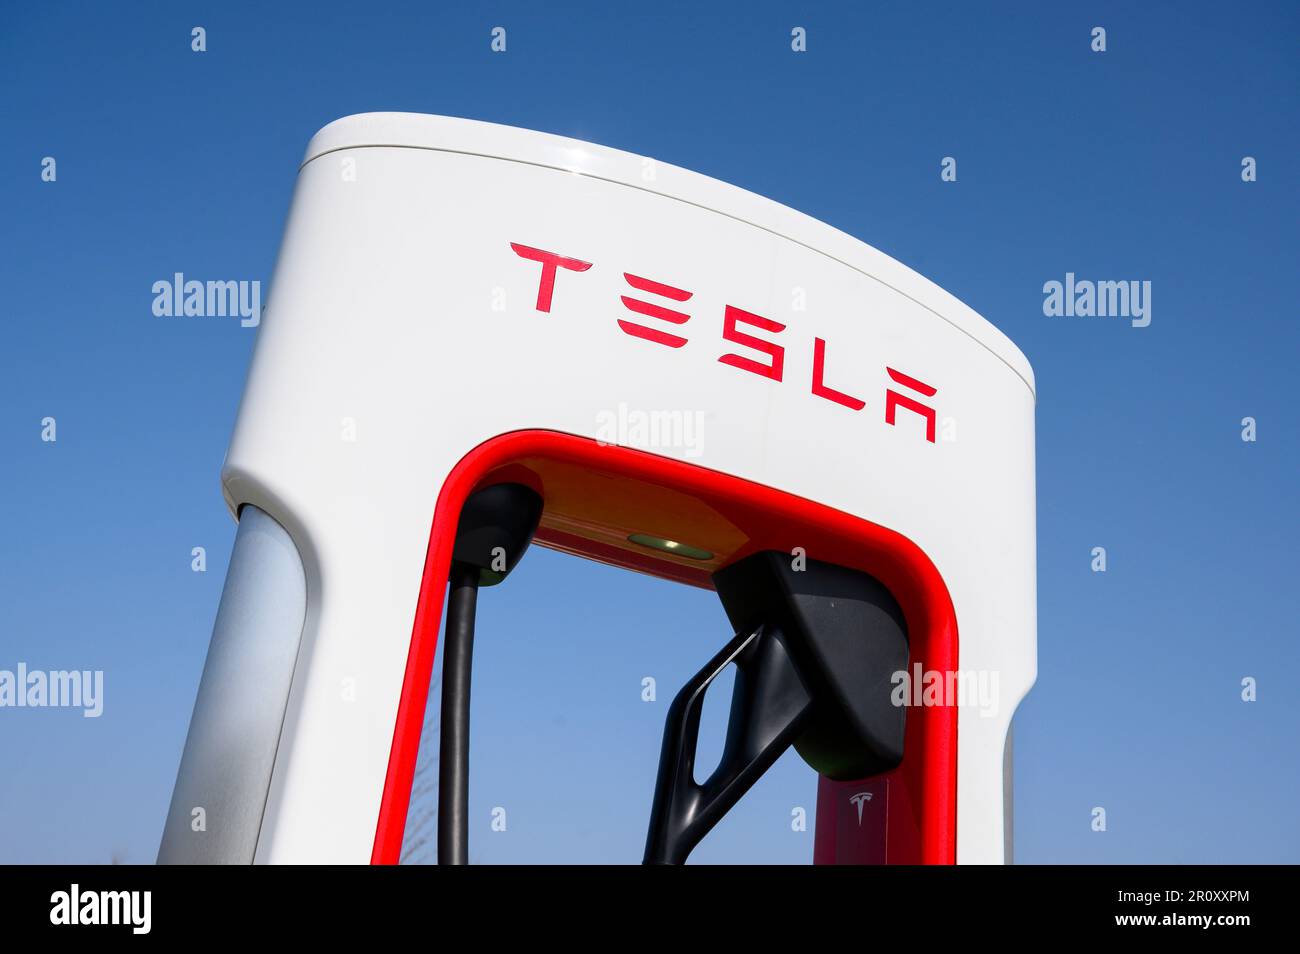 Tesla Supercharger at a motorway service station in England. Stock Photo